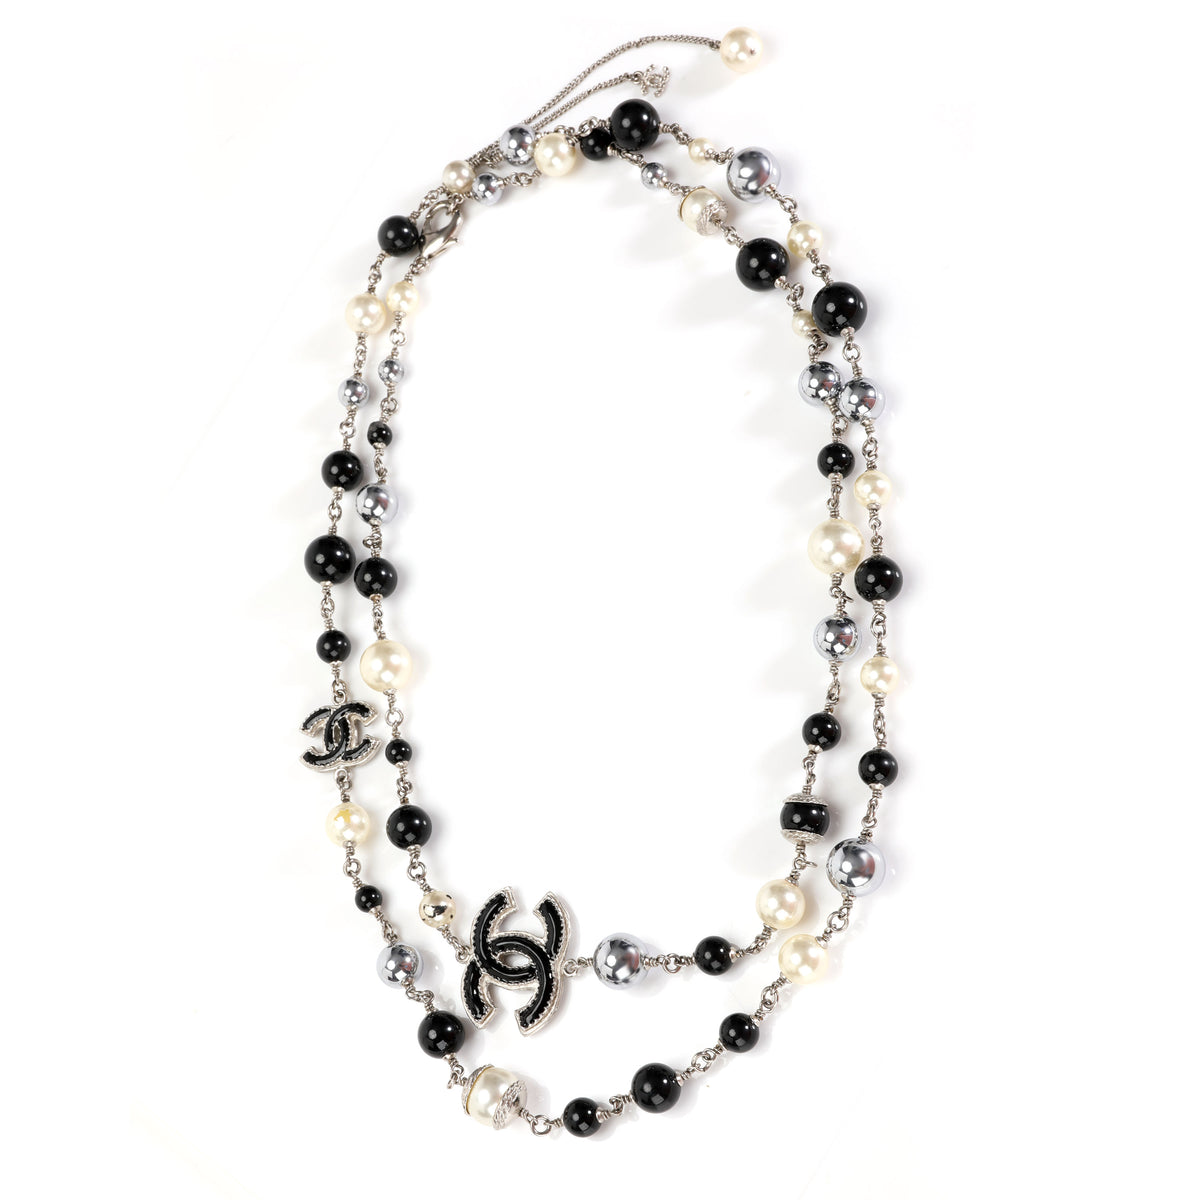 Chanel White/Black Beaded and CC Logo Long Necklace - Jewelry - CHN130516B